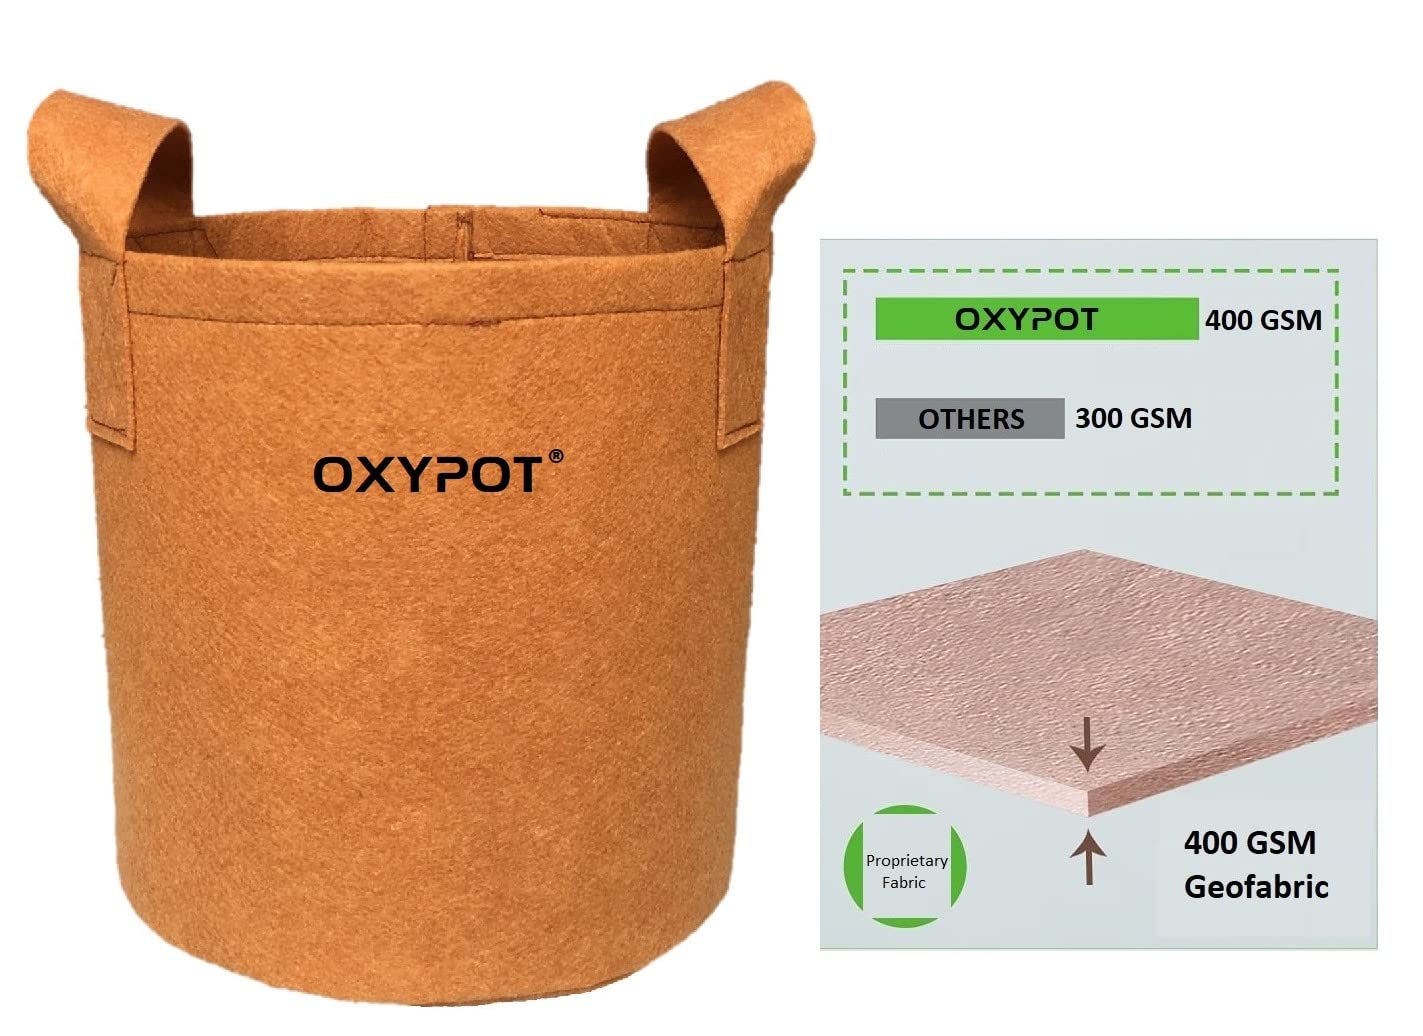 Oxypot Fabric Grow Bag (8" x 8")- Pack of 3